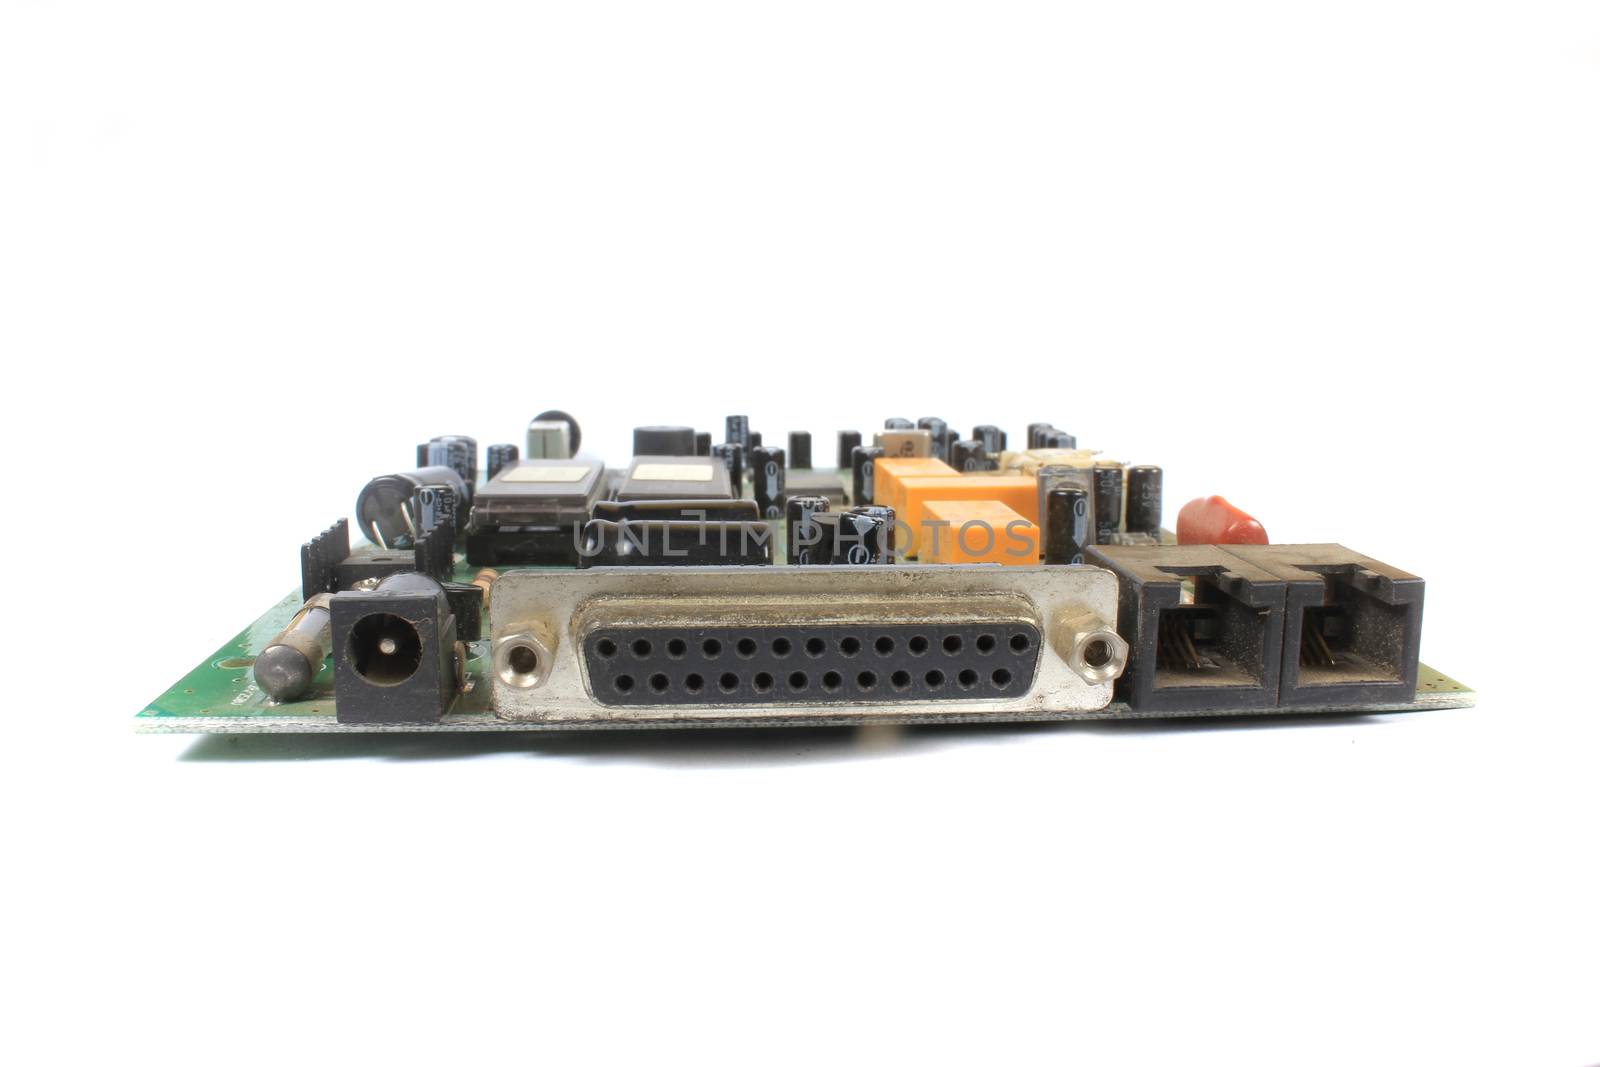 The connections ports like serial, lan, phone and power supply in an old modem